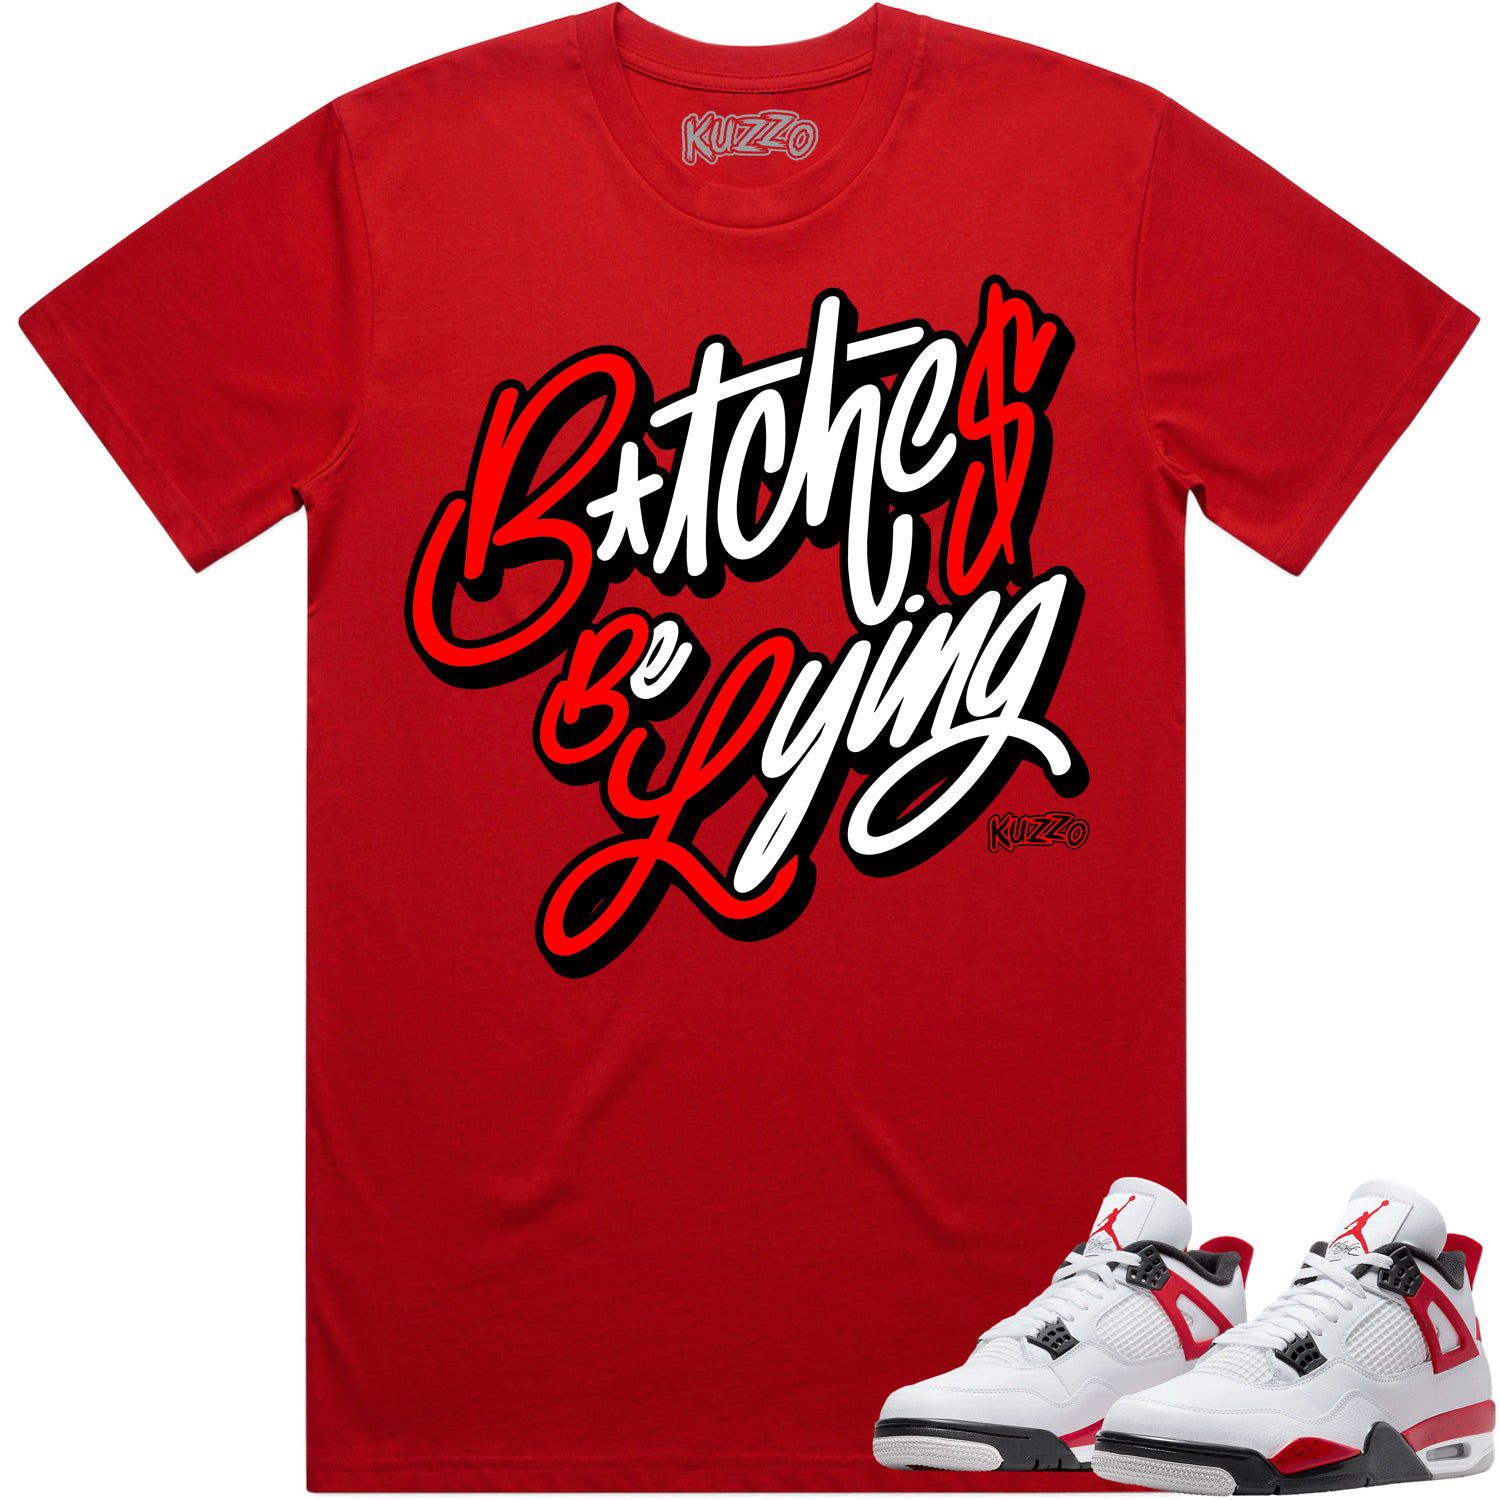 Red Cement 4s Shirt - Jordan Retro 4 Red Cement Shirts - Red BBL